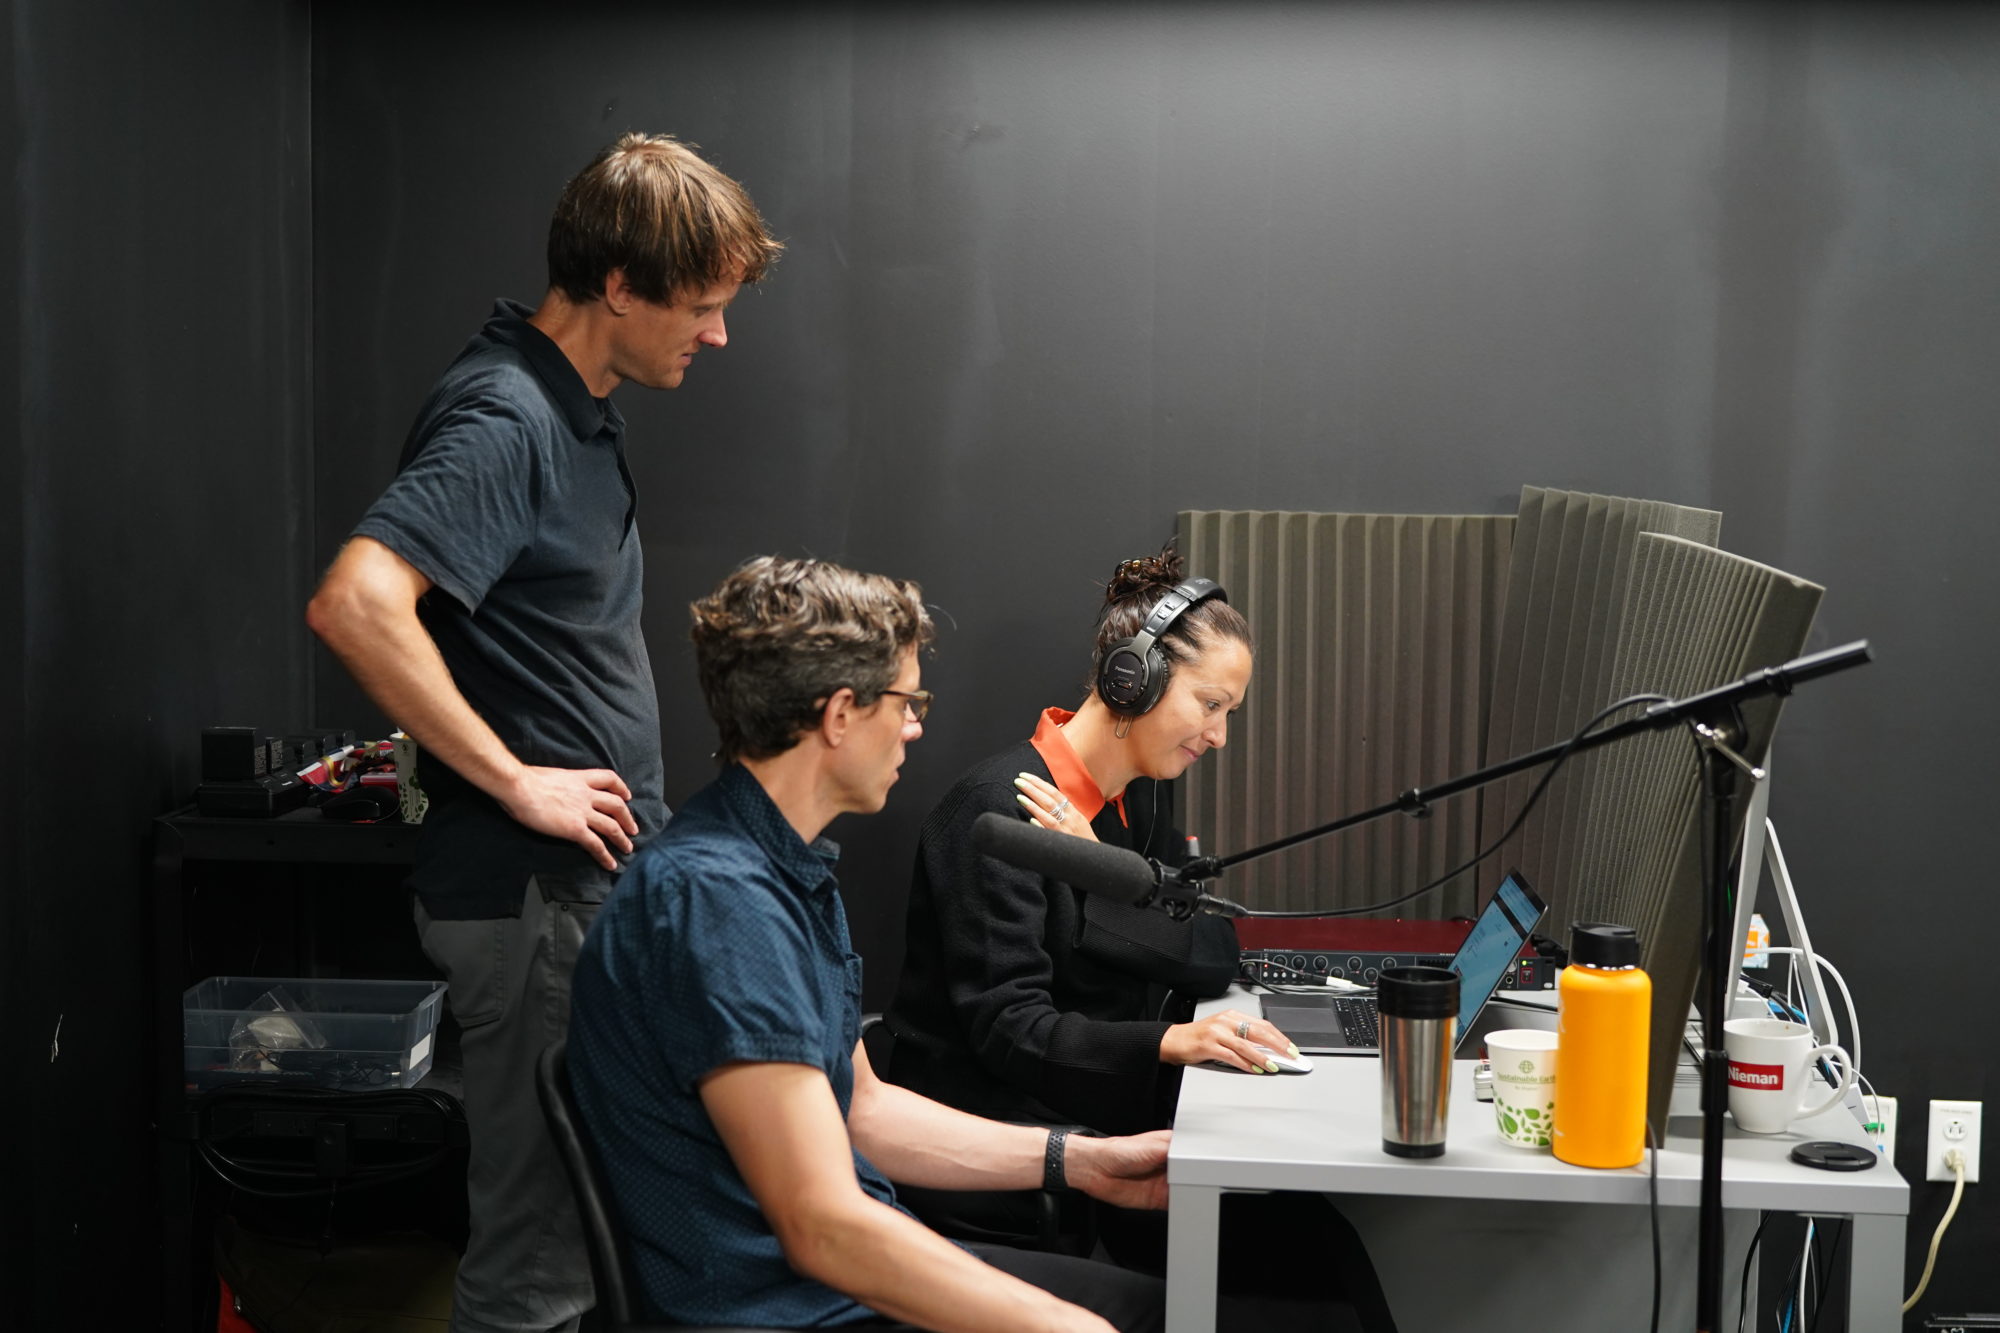 Francesca Panetta, of MIT’s Center for Advanced Virtuality, shown here with co-director Halsey Burgund and voice actor Lewis D. Wheeler (seated)—created a deepfake video about the Apollo 11 mission to offer a cautionary tale.